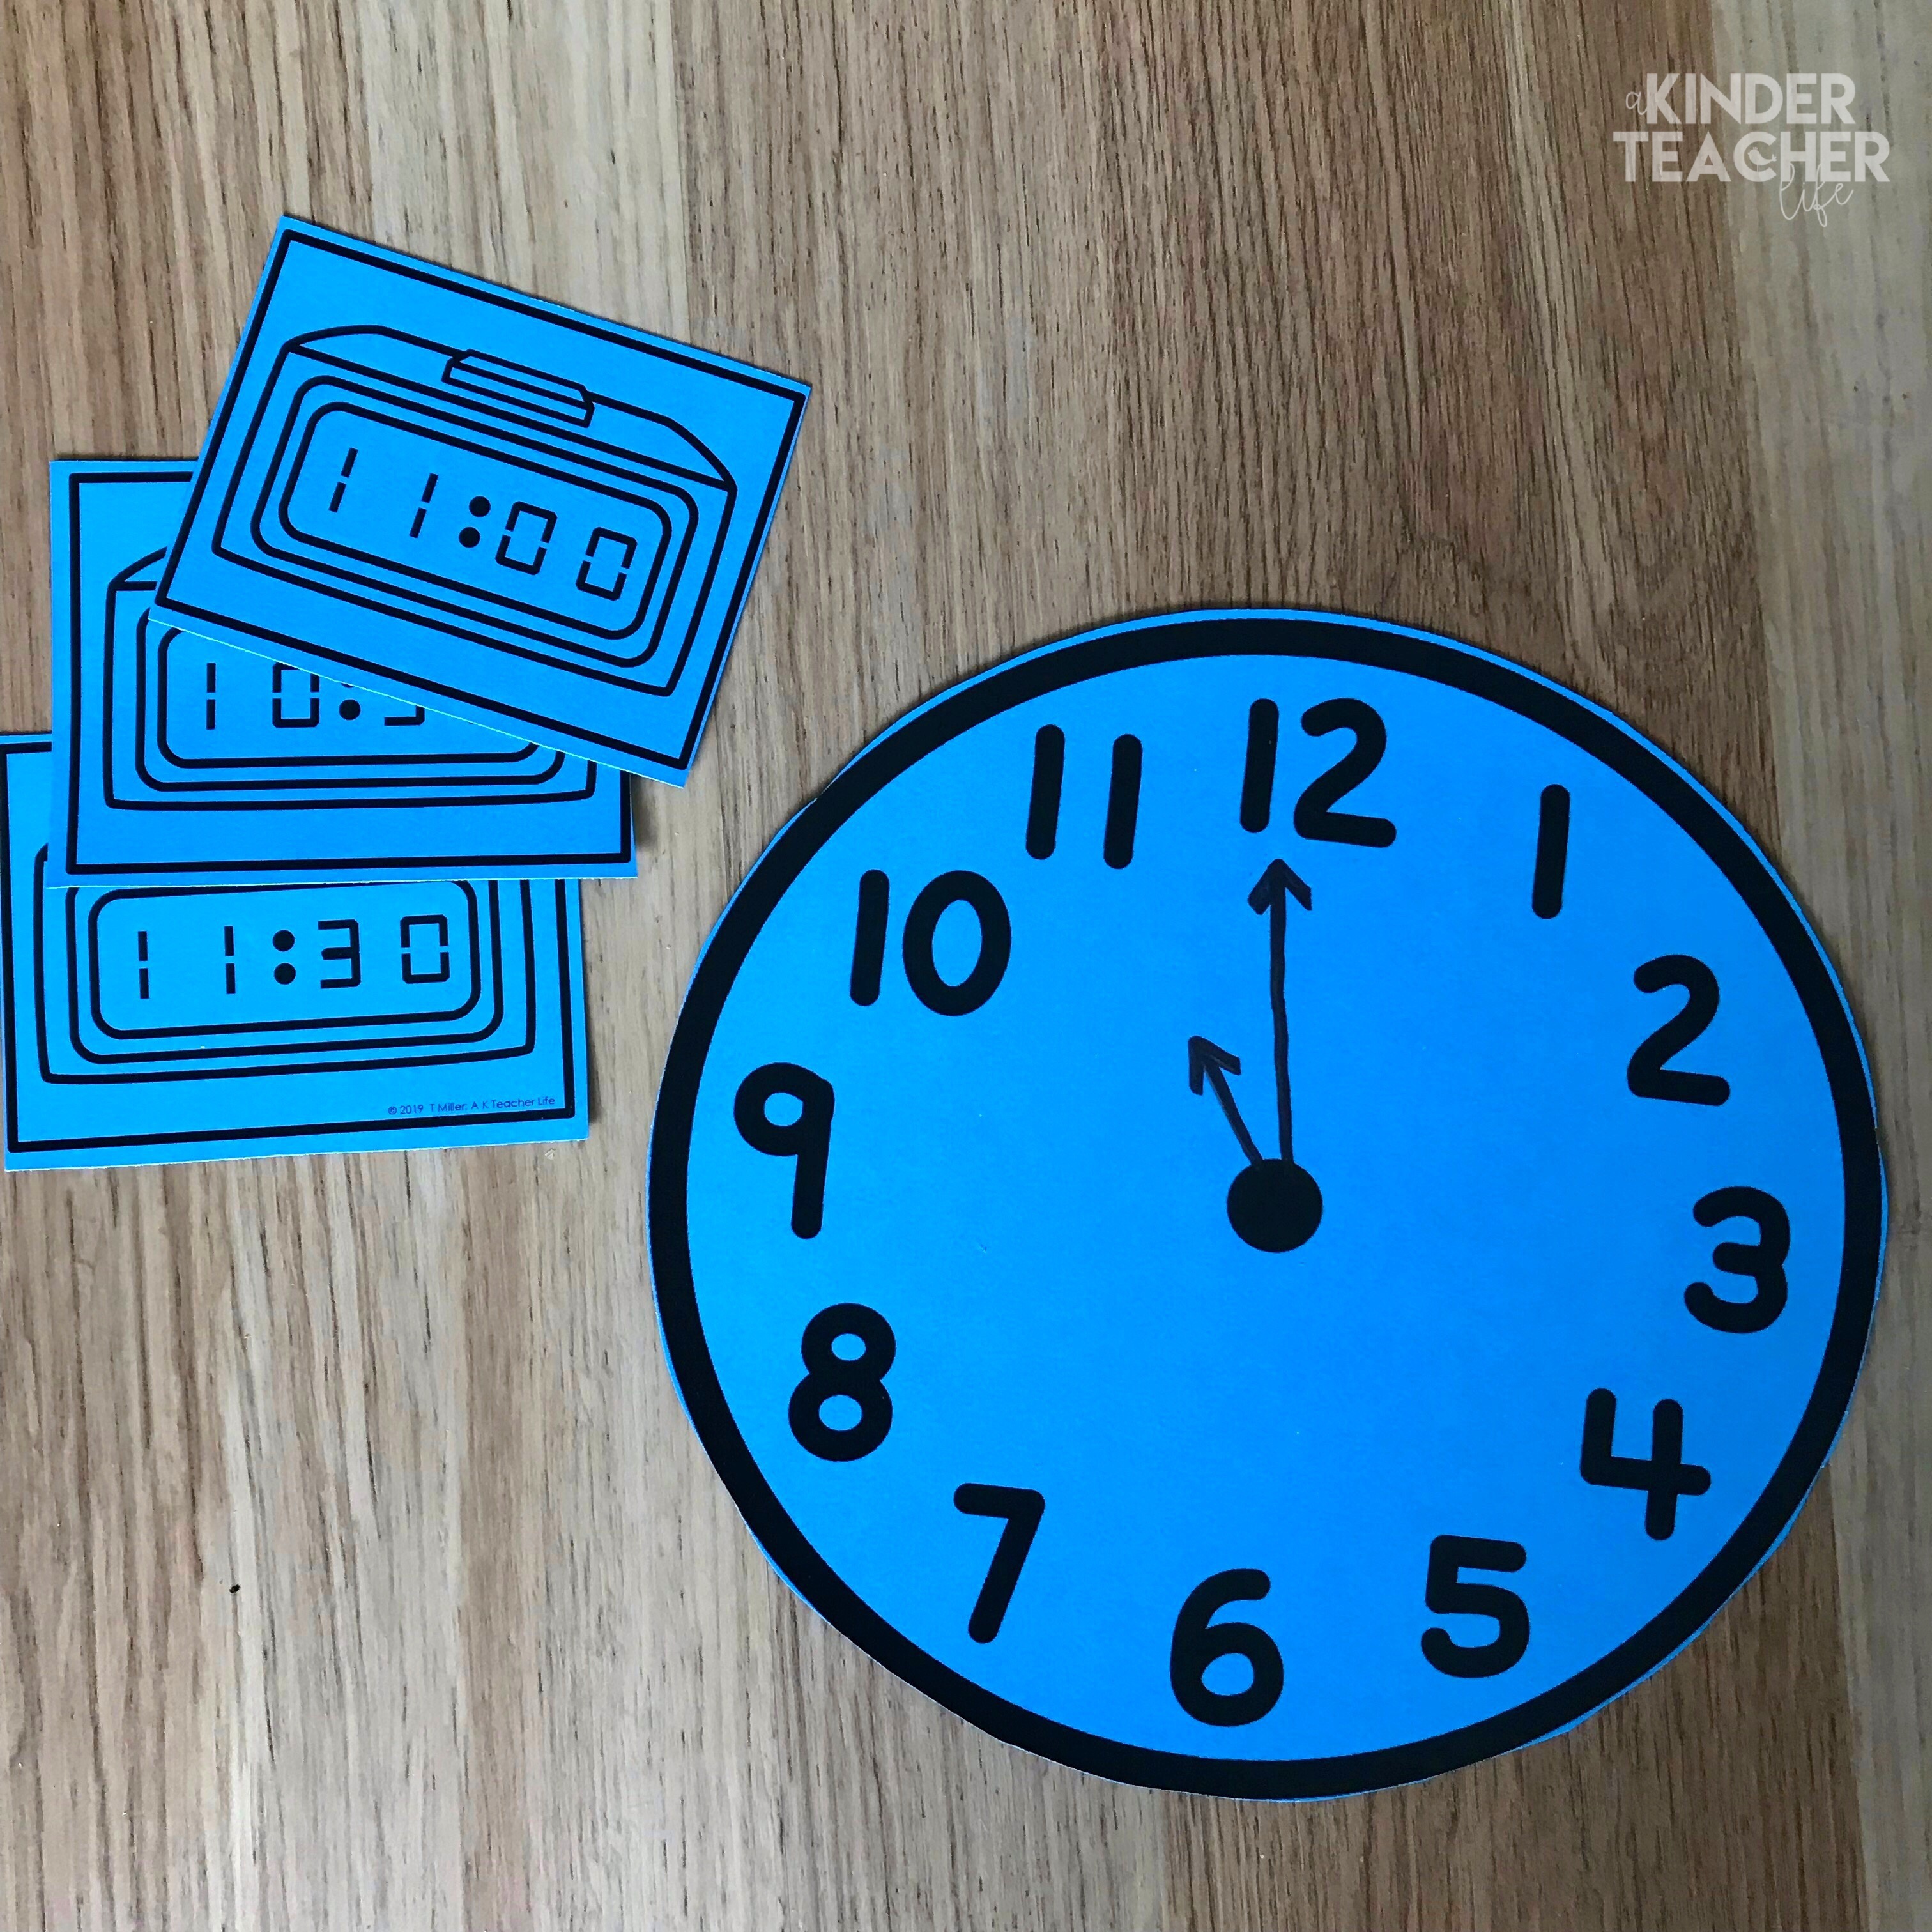 Flip and draw the time - Hands-on telling time math center activities for first grade students. 